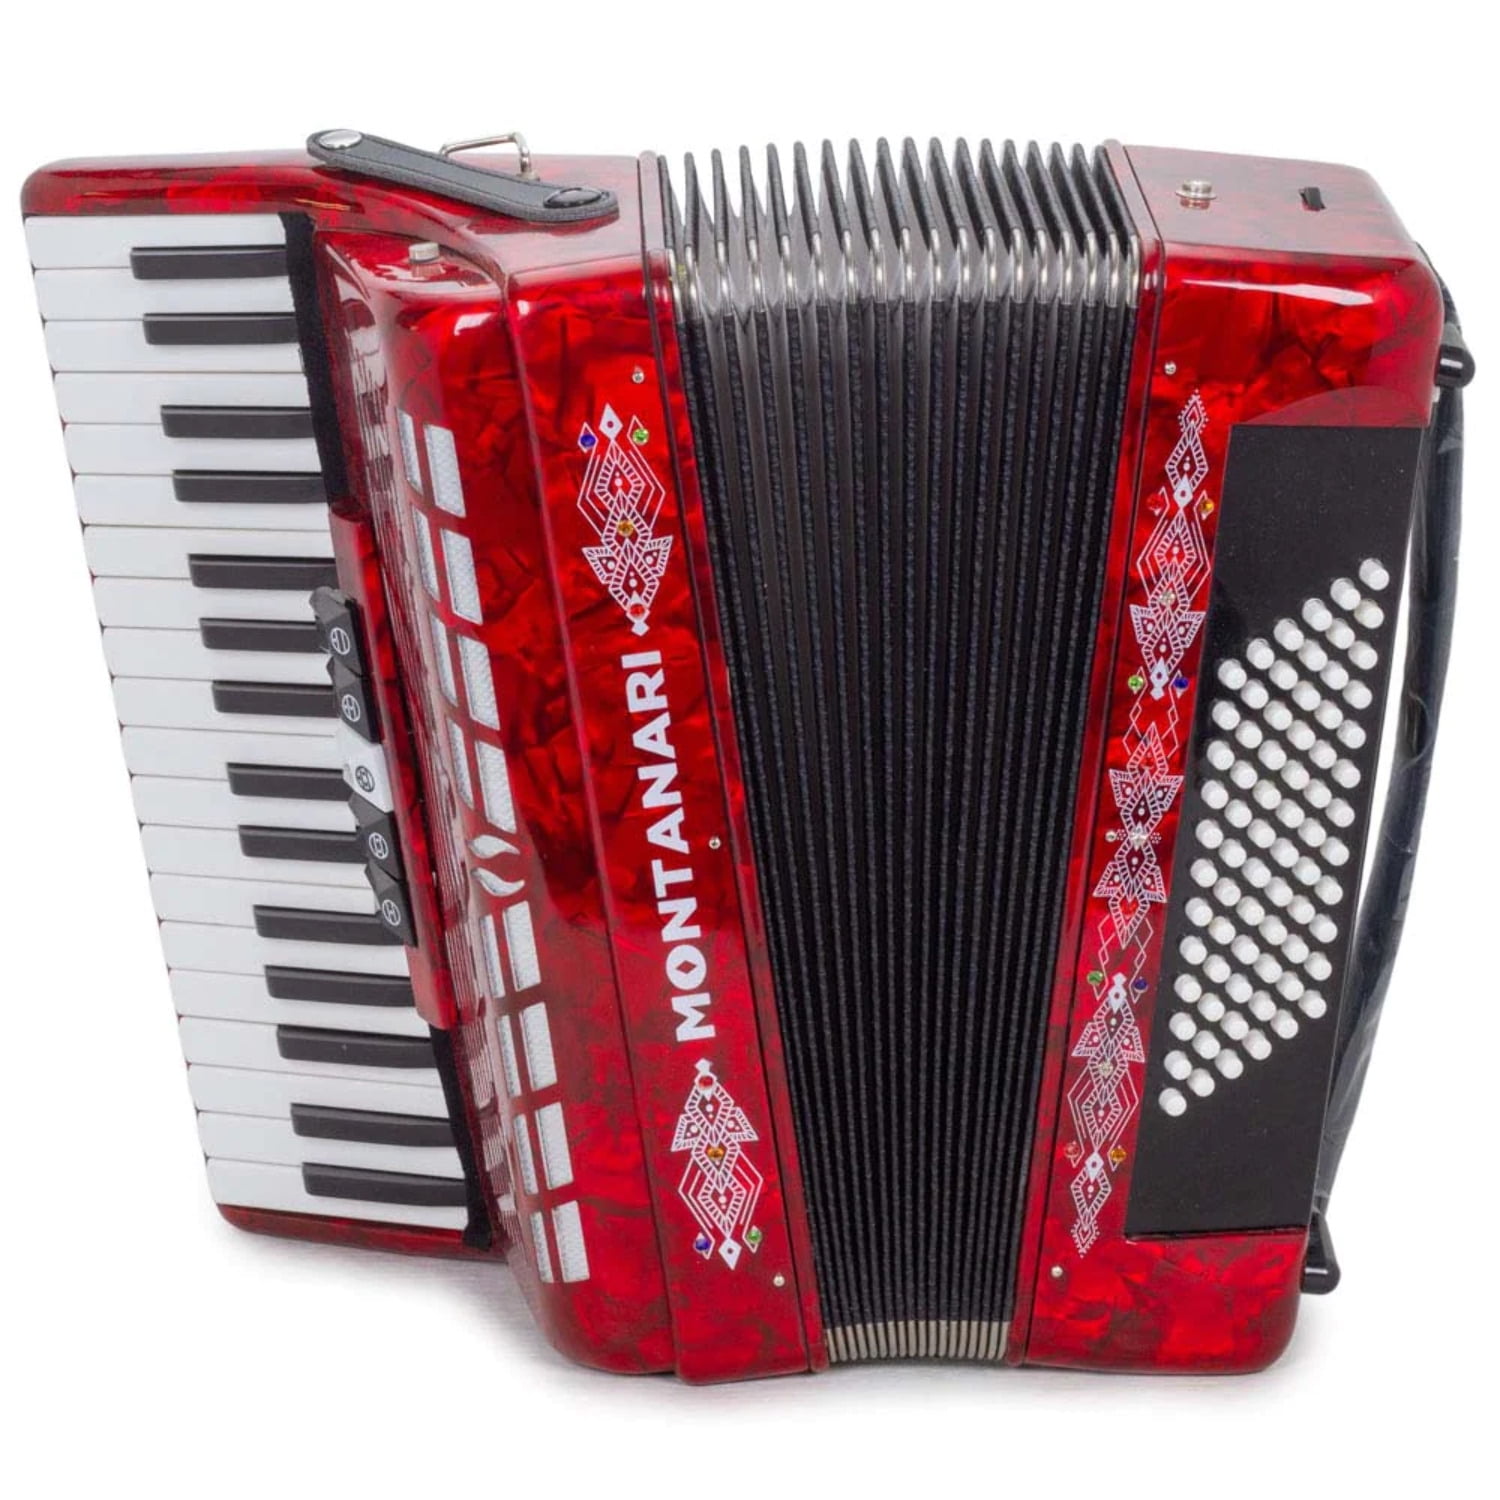 Dcenta Kids Accordion Toy 10 Keys Buttons Mini Accordion Musical